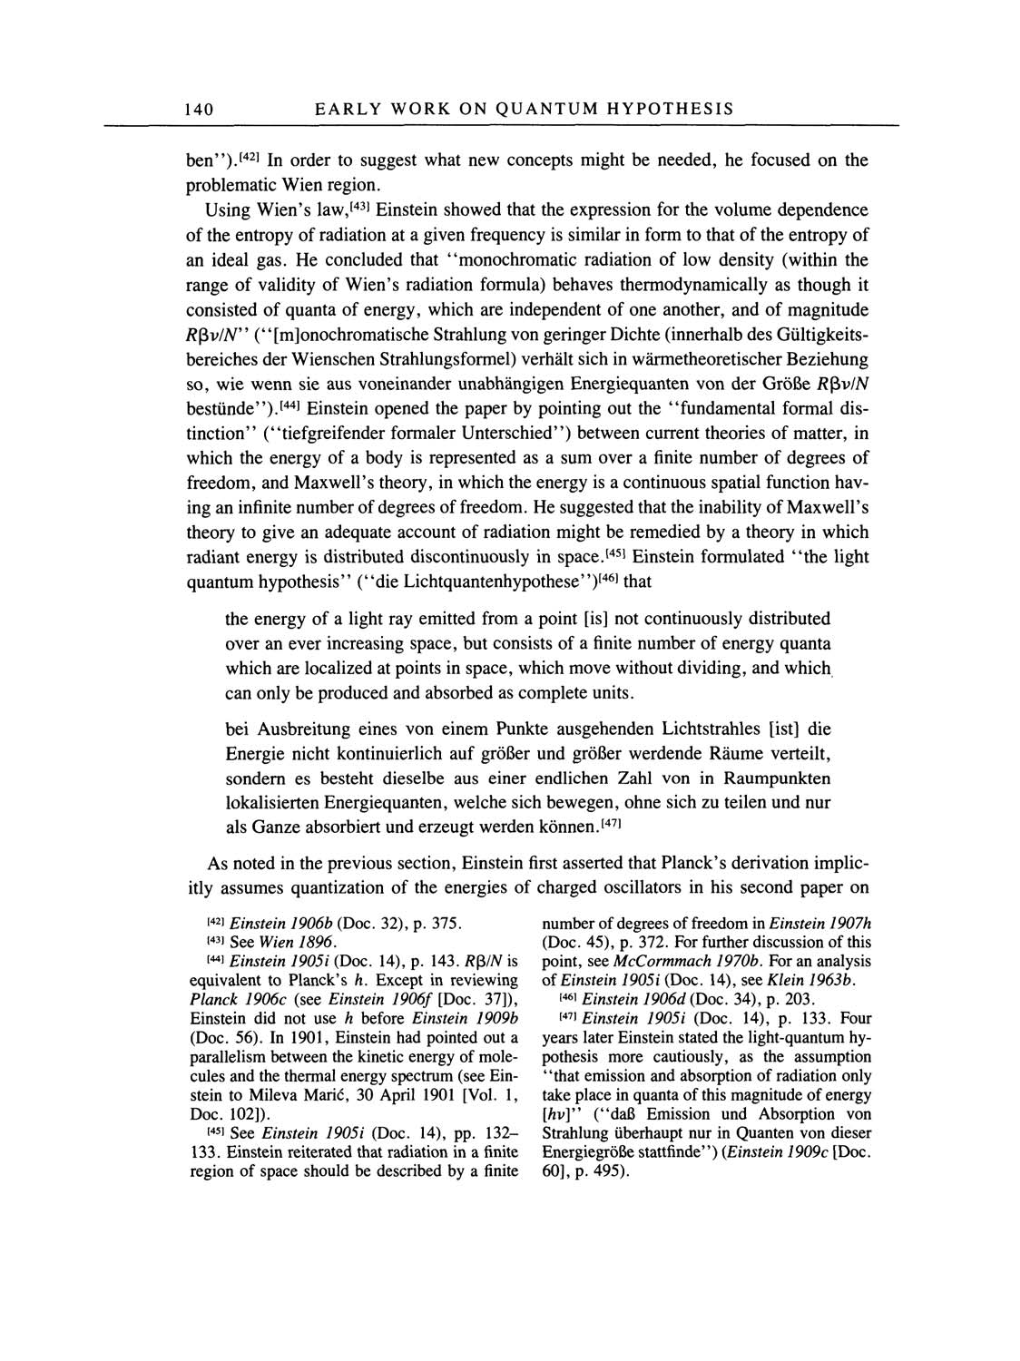 Volume 2: The Swiss Years: Writings, 1900-1909 page 140